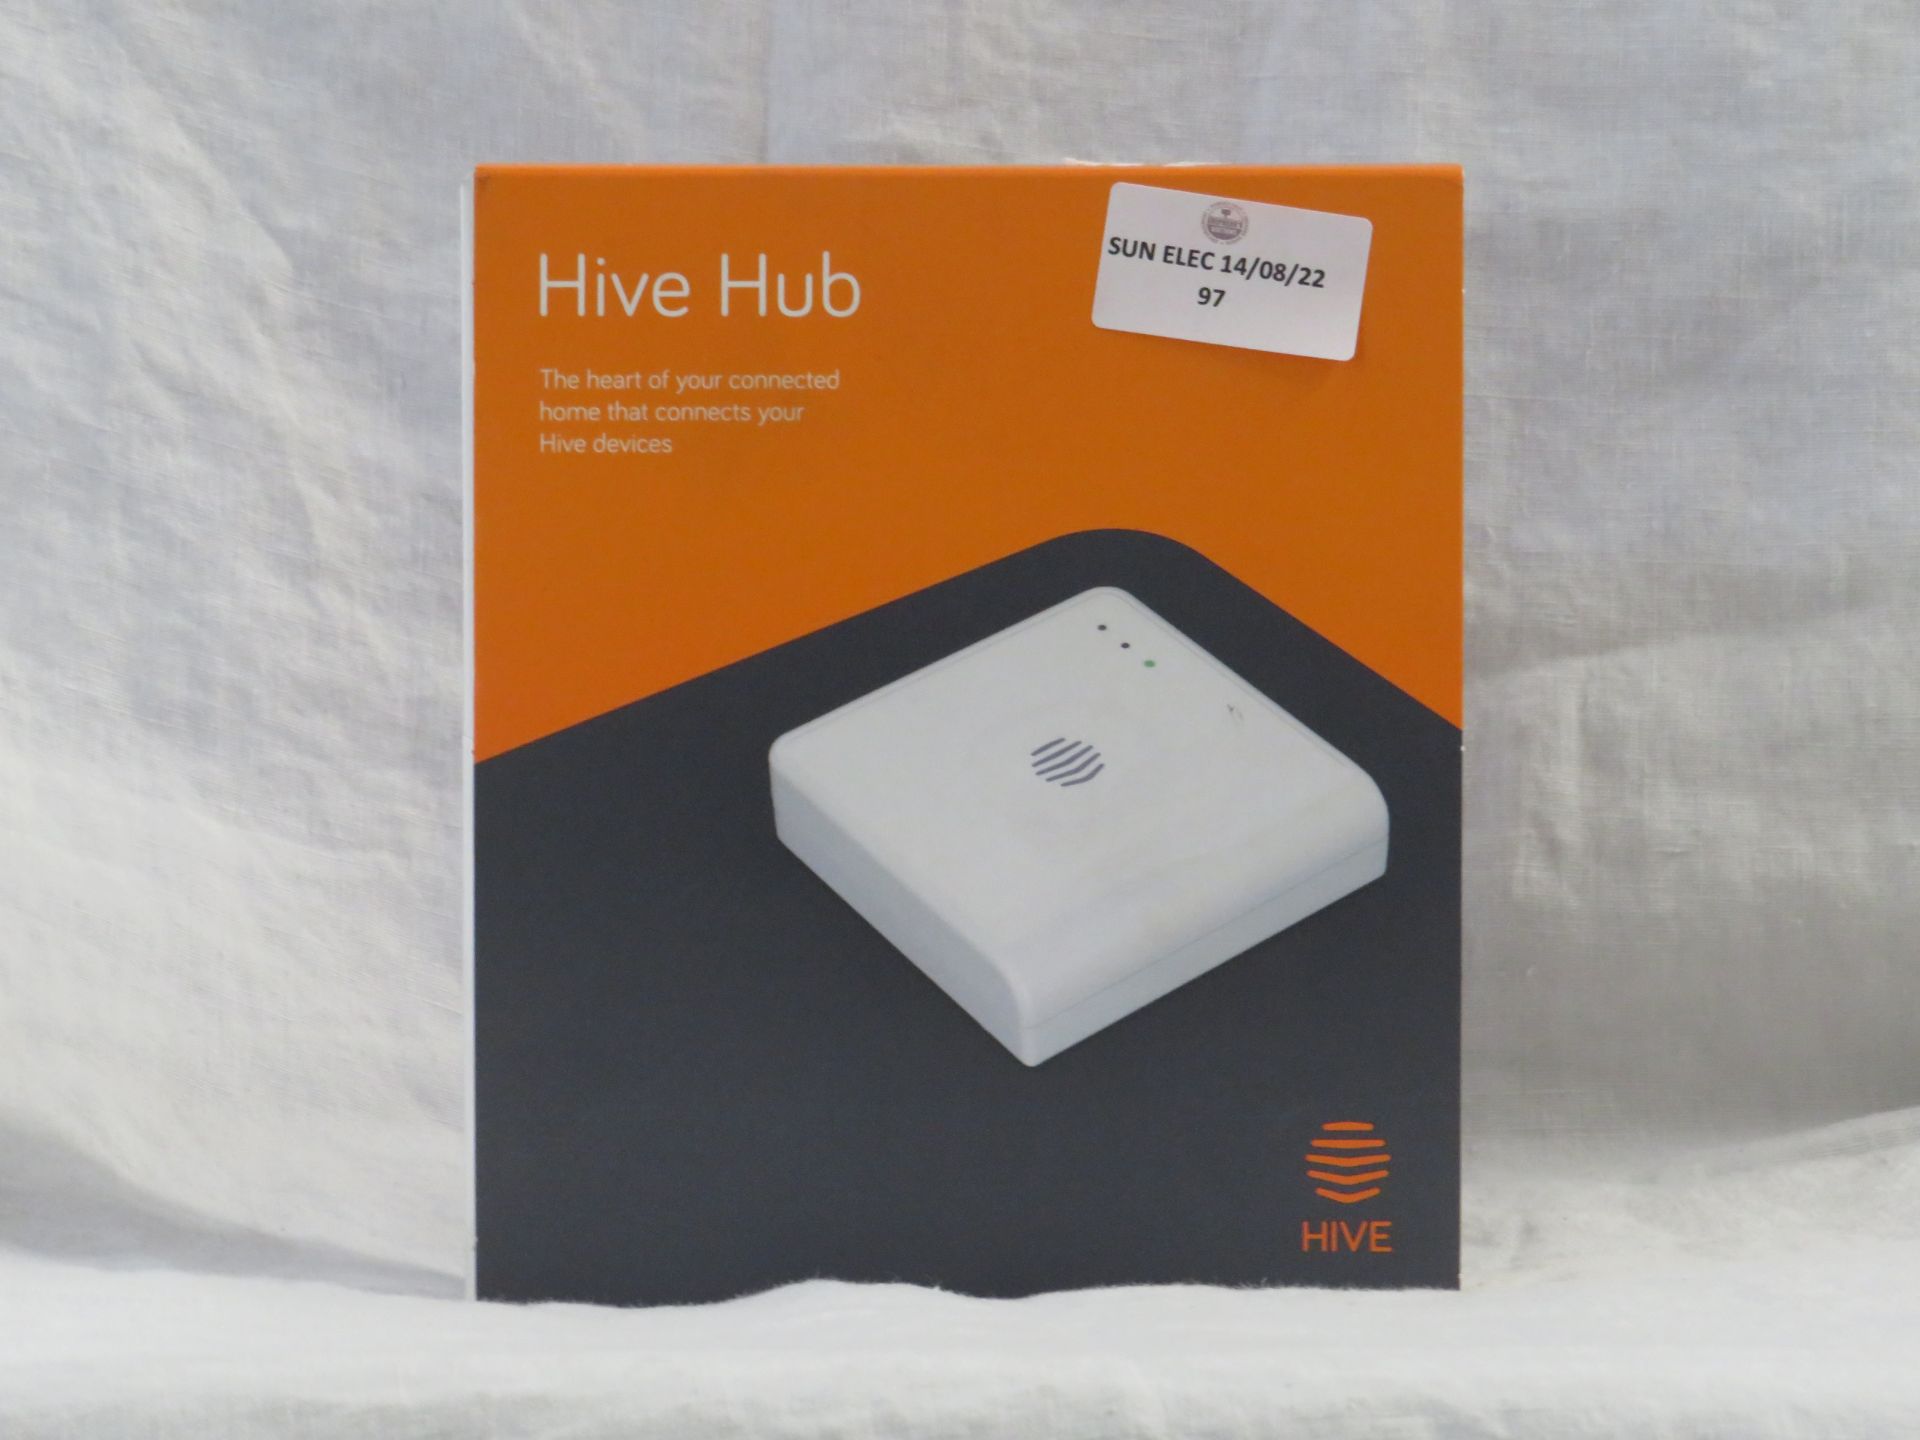 1x Hive Hub - Unchecked in original packaging